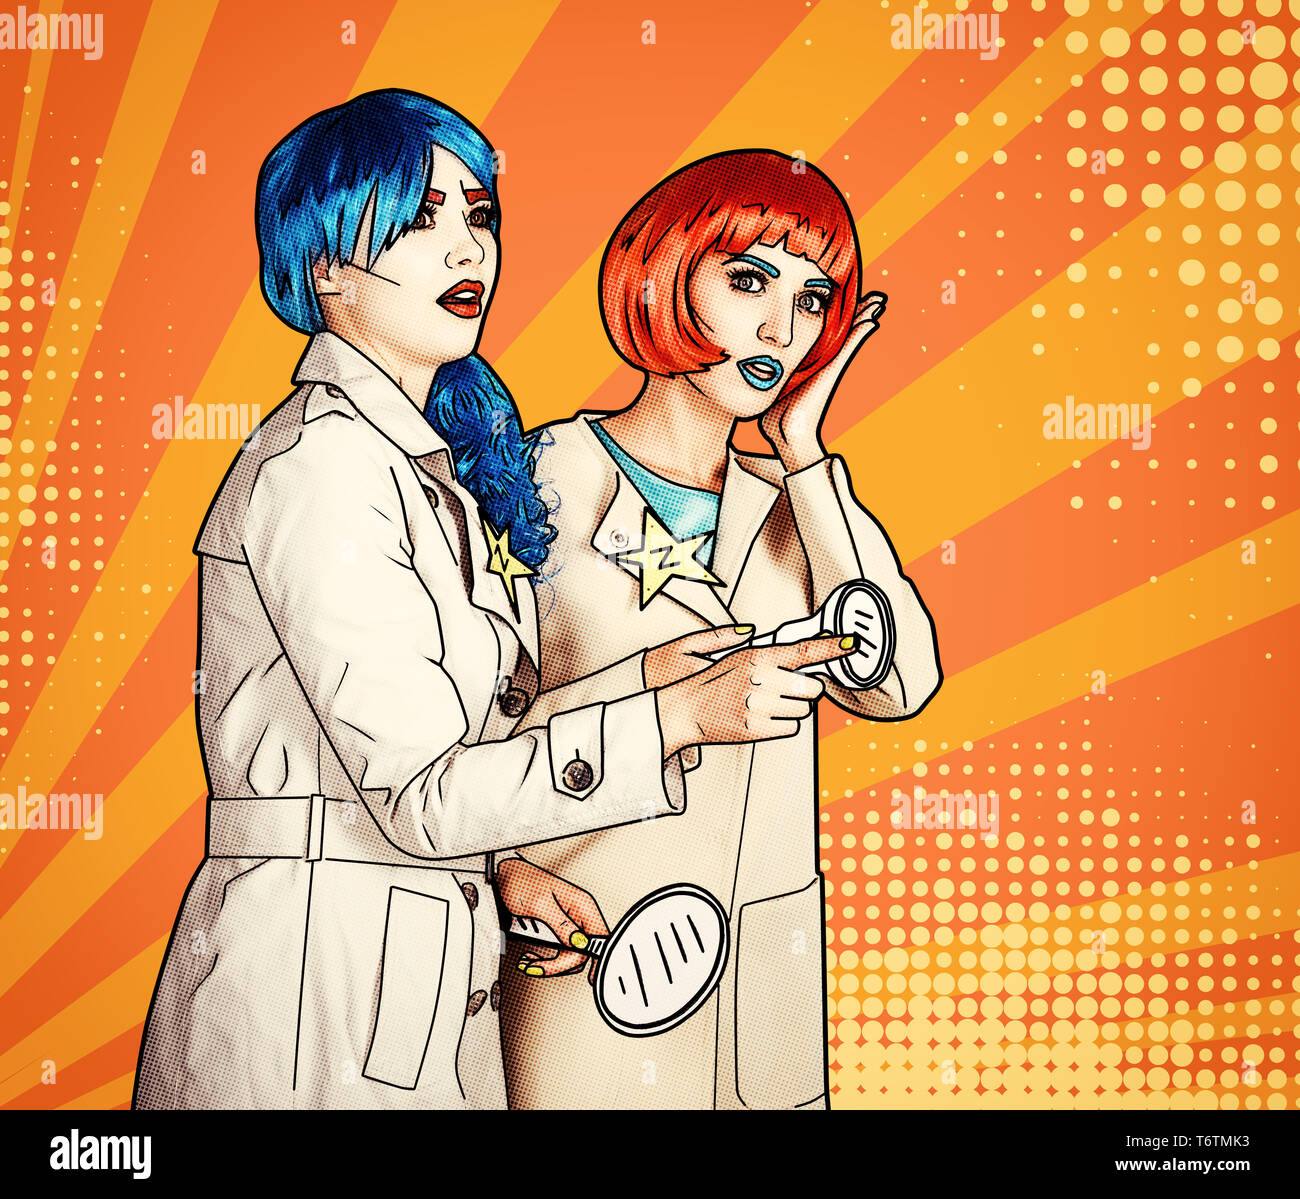 Female detectives investigate a crime. Young women in comic pop art make-up style. Stock Photo